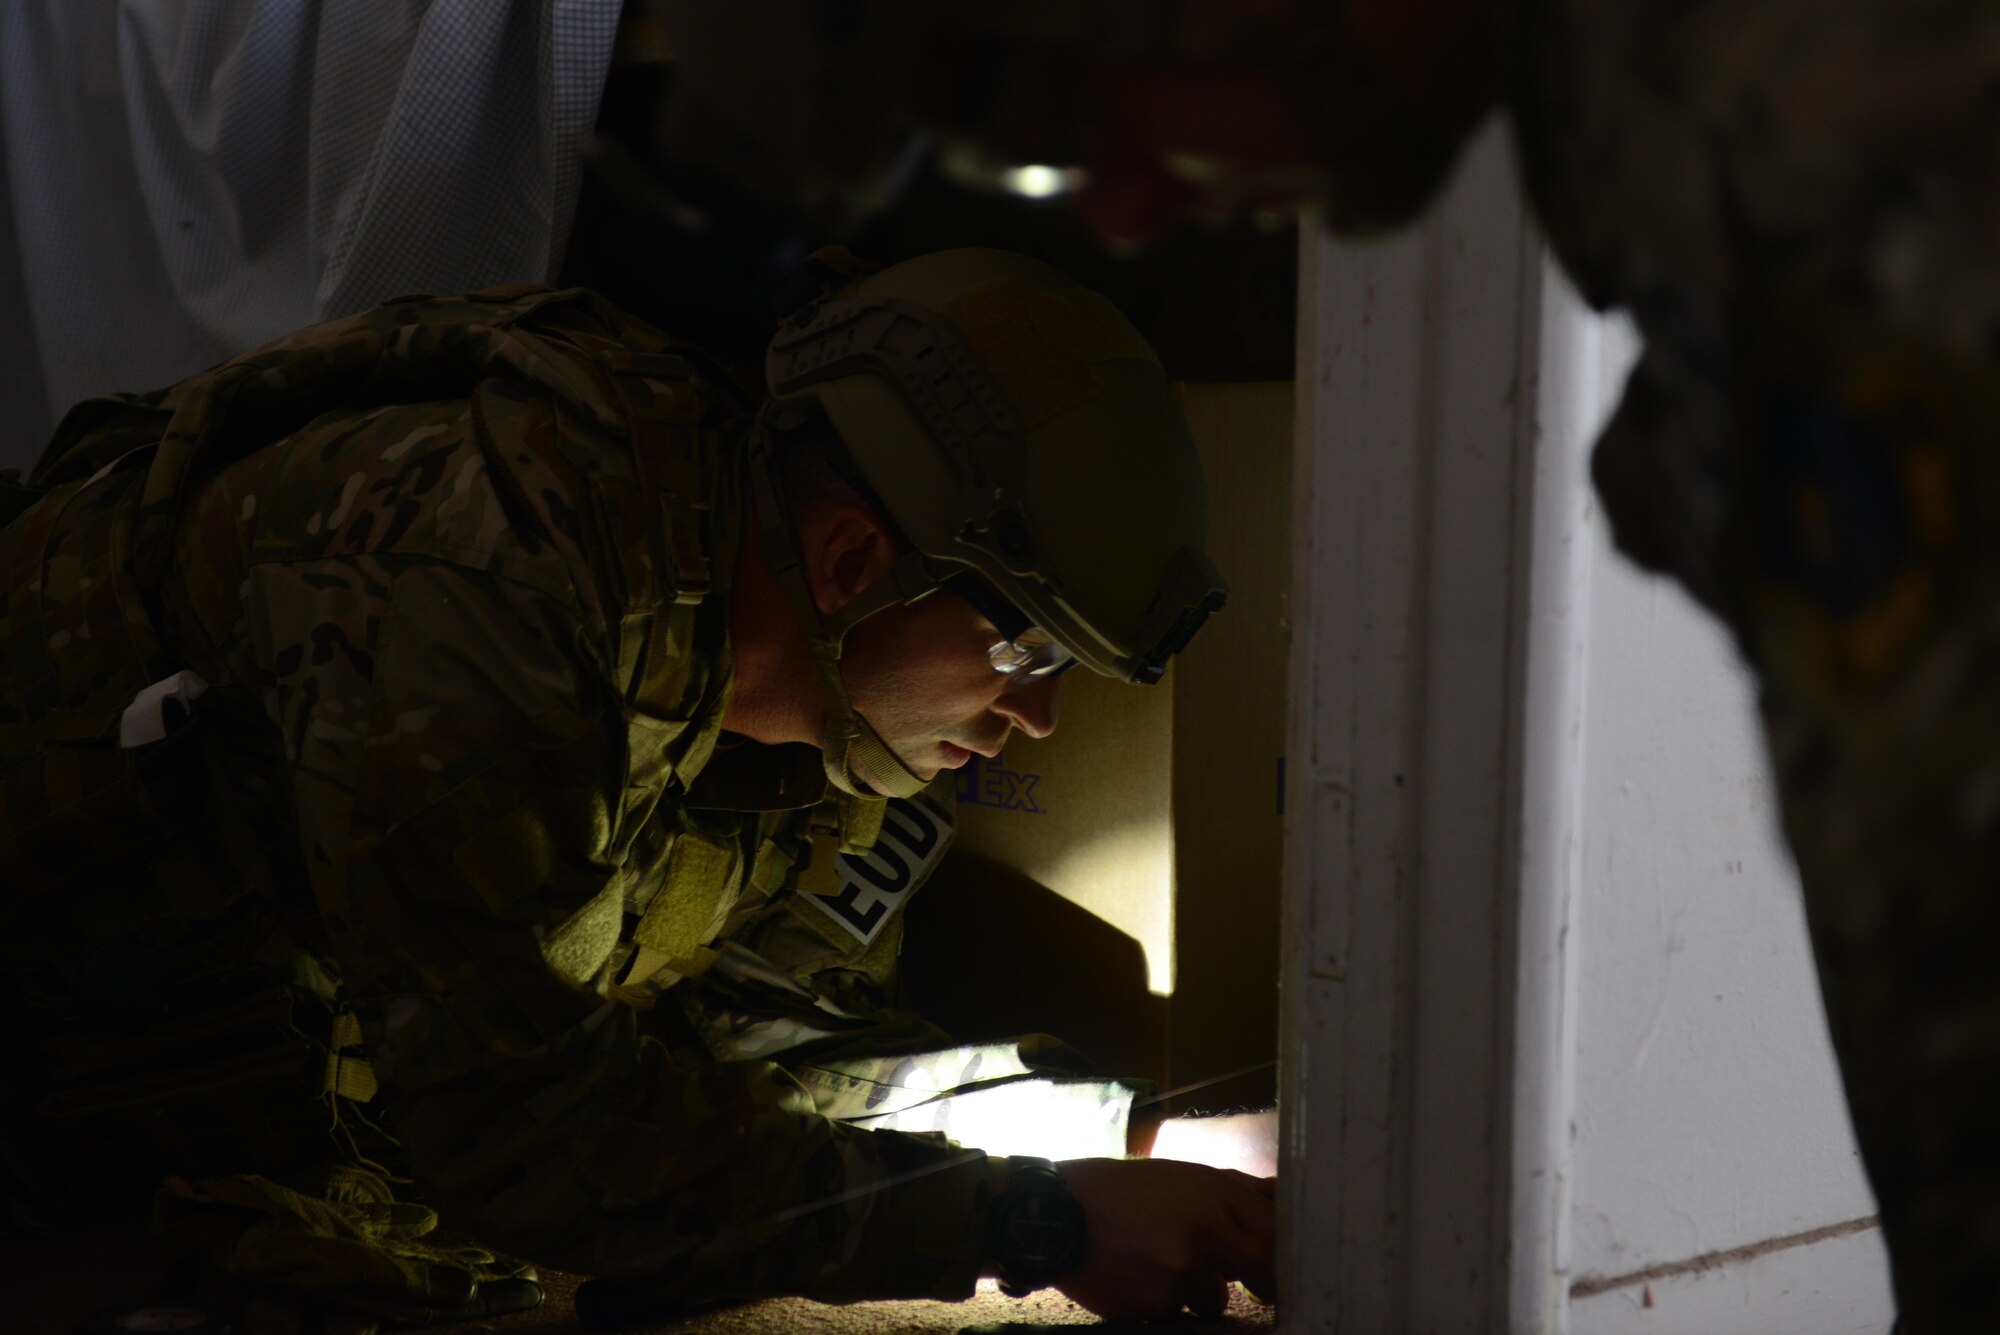 Tech. Sgt. Noah Cheney, 9th Civil Engineer Squadron explosive ordnance disposal technician, diffuses a simulated improvised explosive device May 5th, 2016, at Clear Lake, California. Cheney was participating in Operation: Half-Life, an exercise designed to evaluate a synchronized, multi-agency response to a crisis situation. (U.S. Air Force photo by Senior Airman Bobby Cummings)